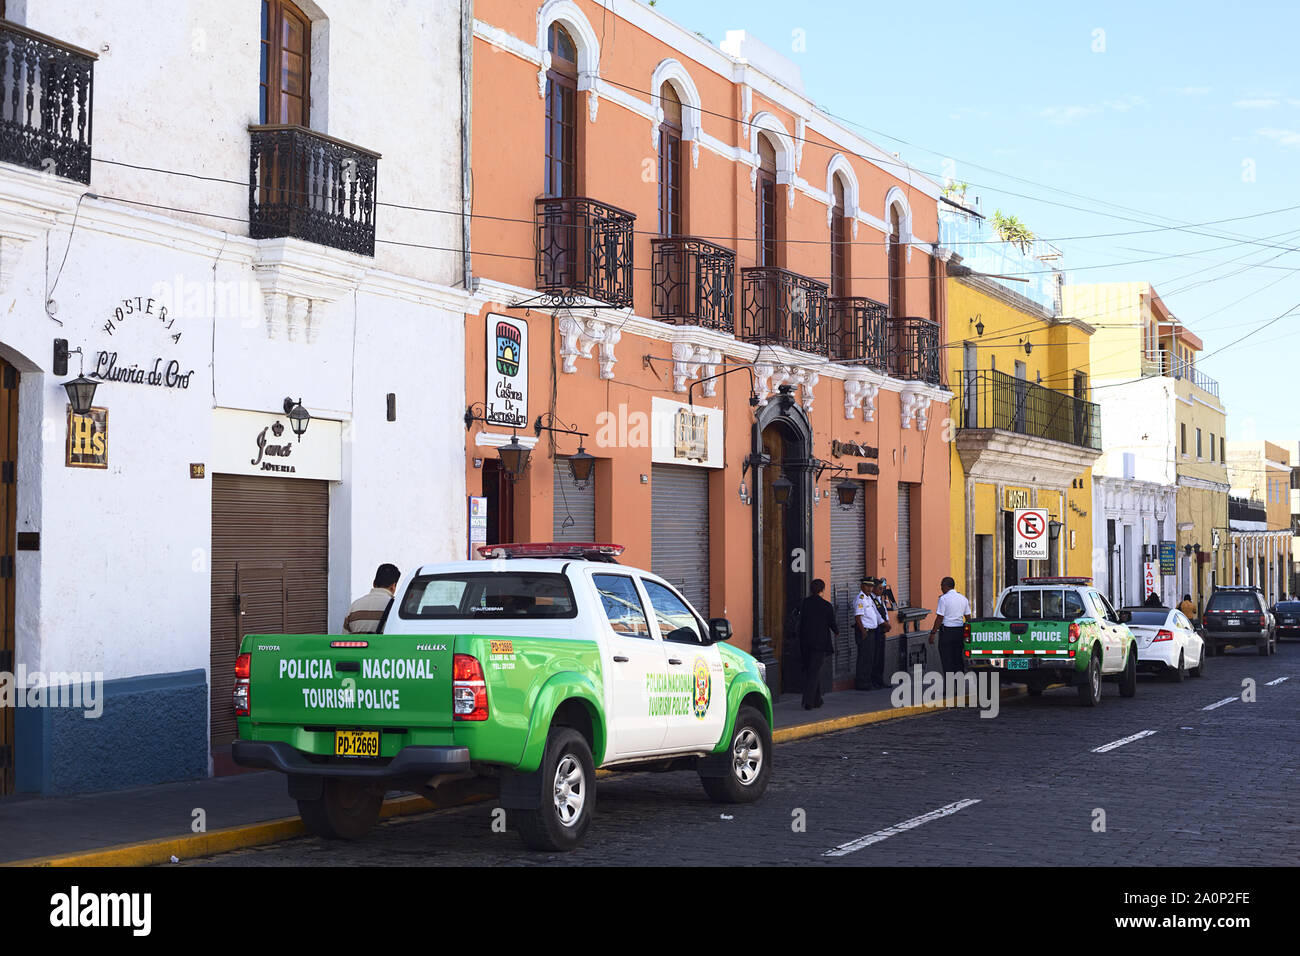 AREQUIPA, PERU - SEPTEMBER 9, 2014: Unidentified people on Jerusalen street with two tourism police pickups standing on the roadside in Arequipa, Peru Stock Photo